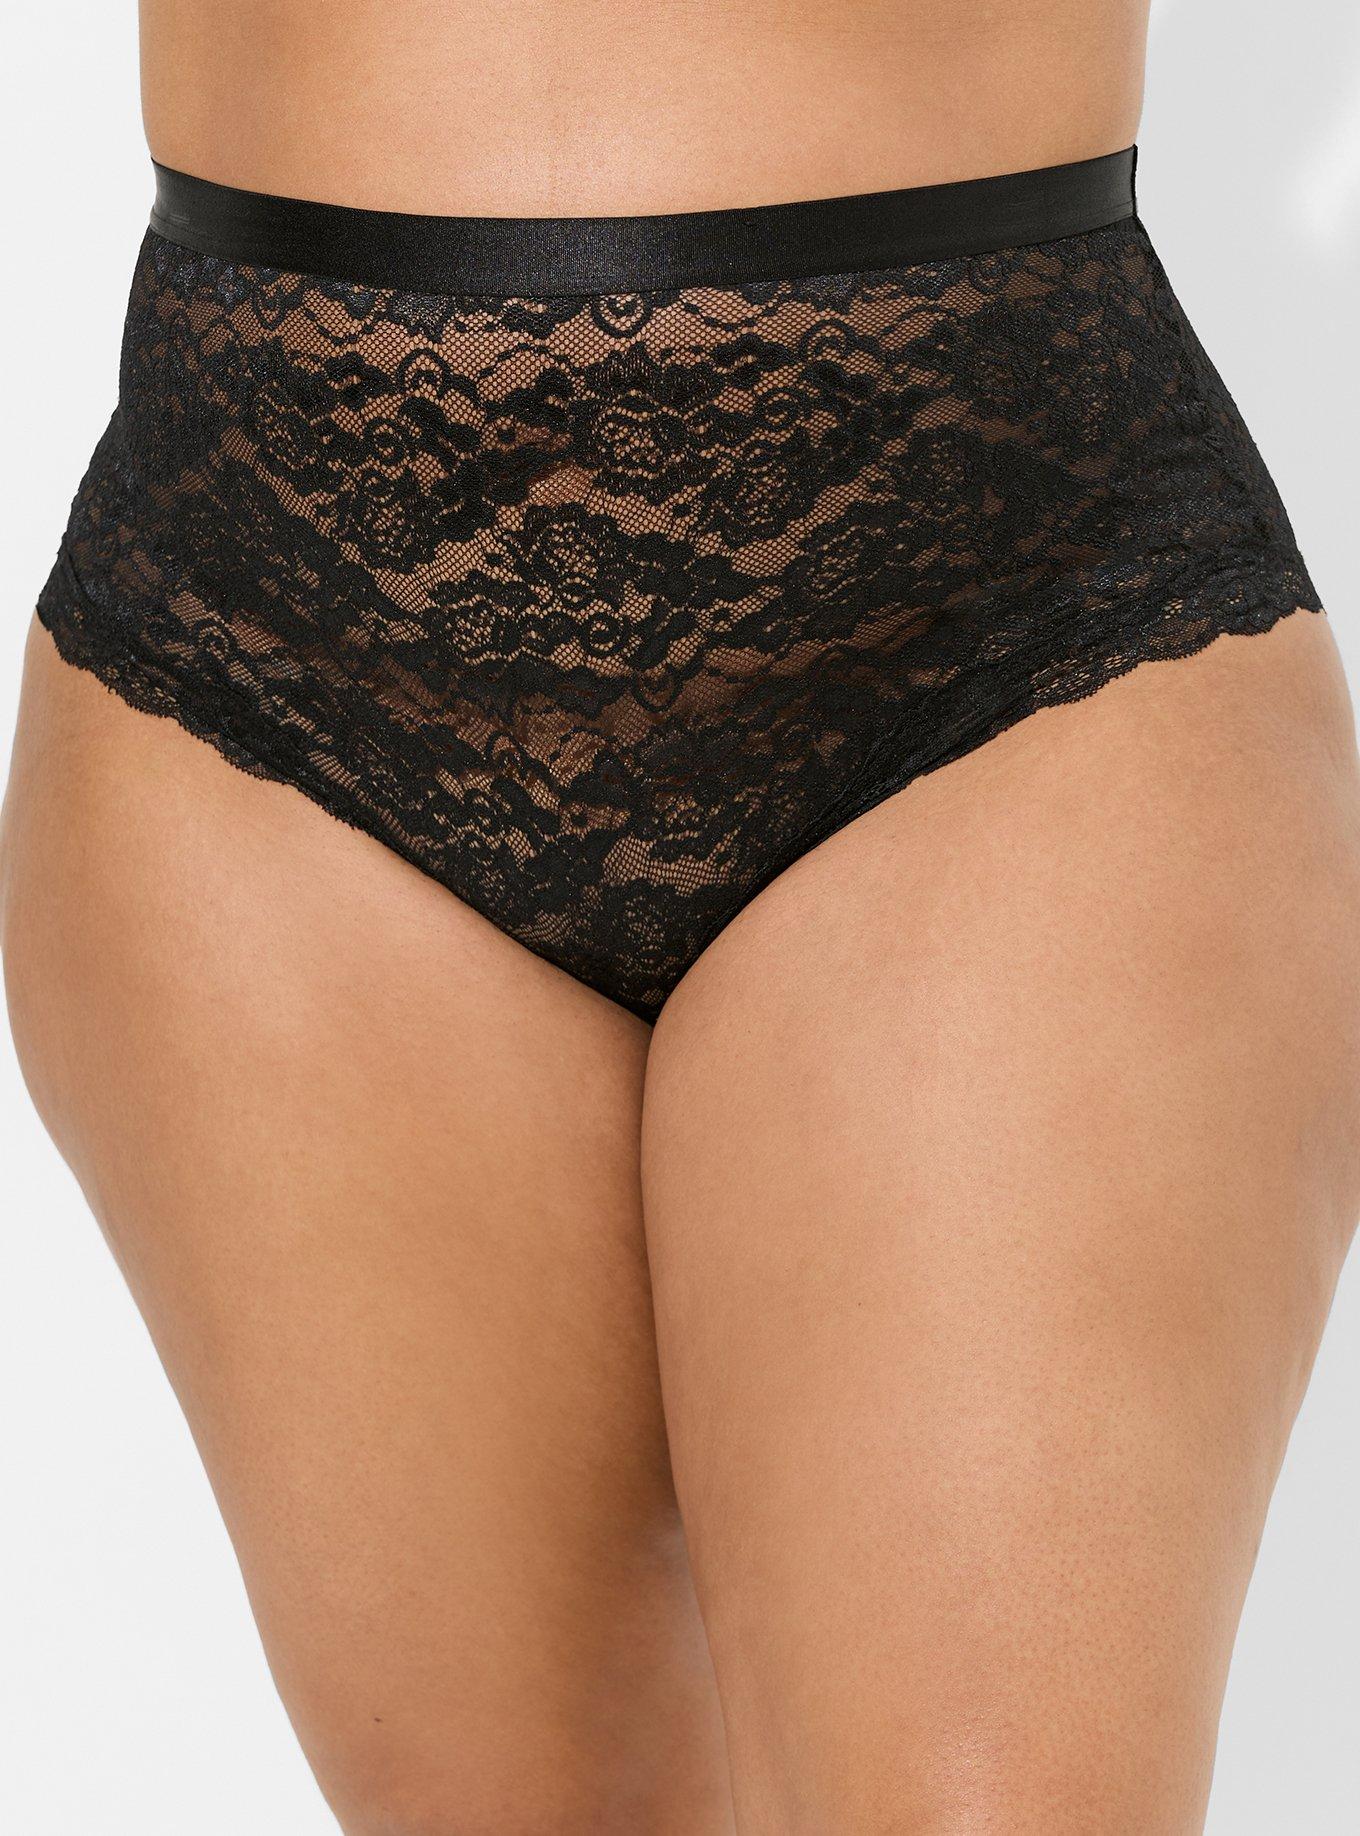 Plus Size Comfortable Hipster Sexy Flower Lace Briefs High Rise